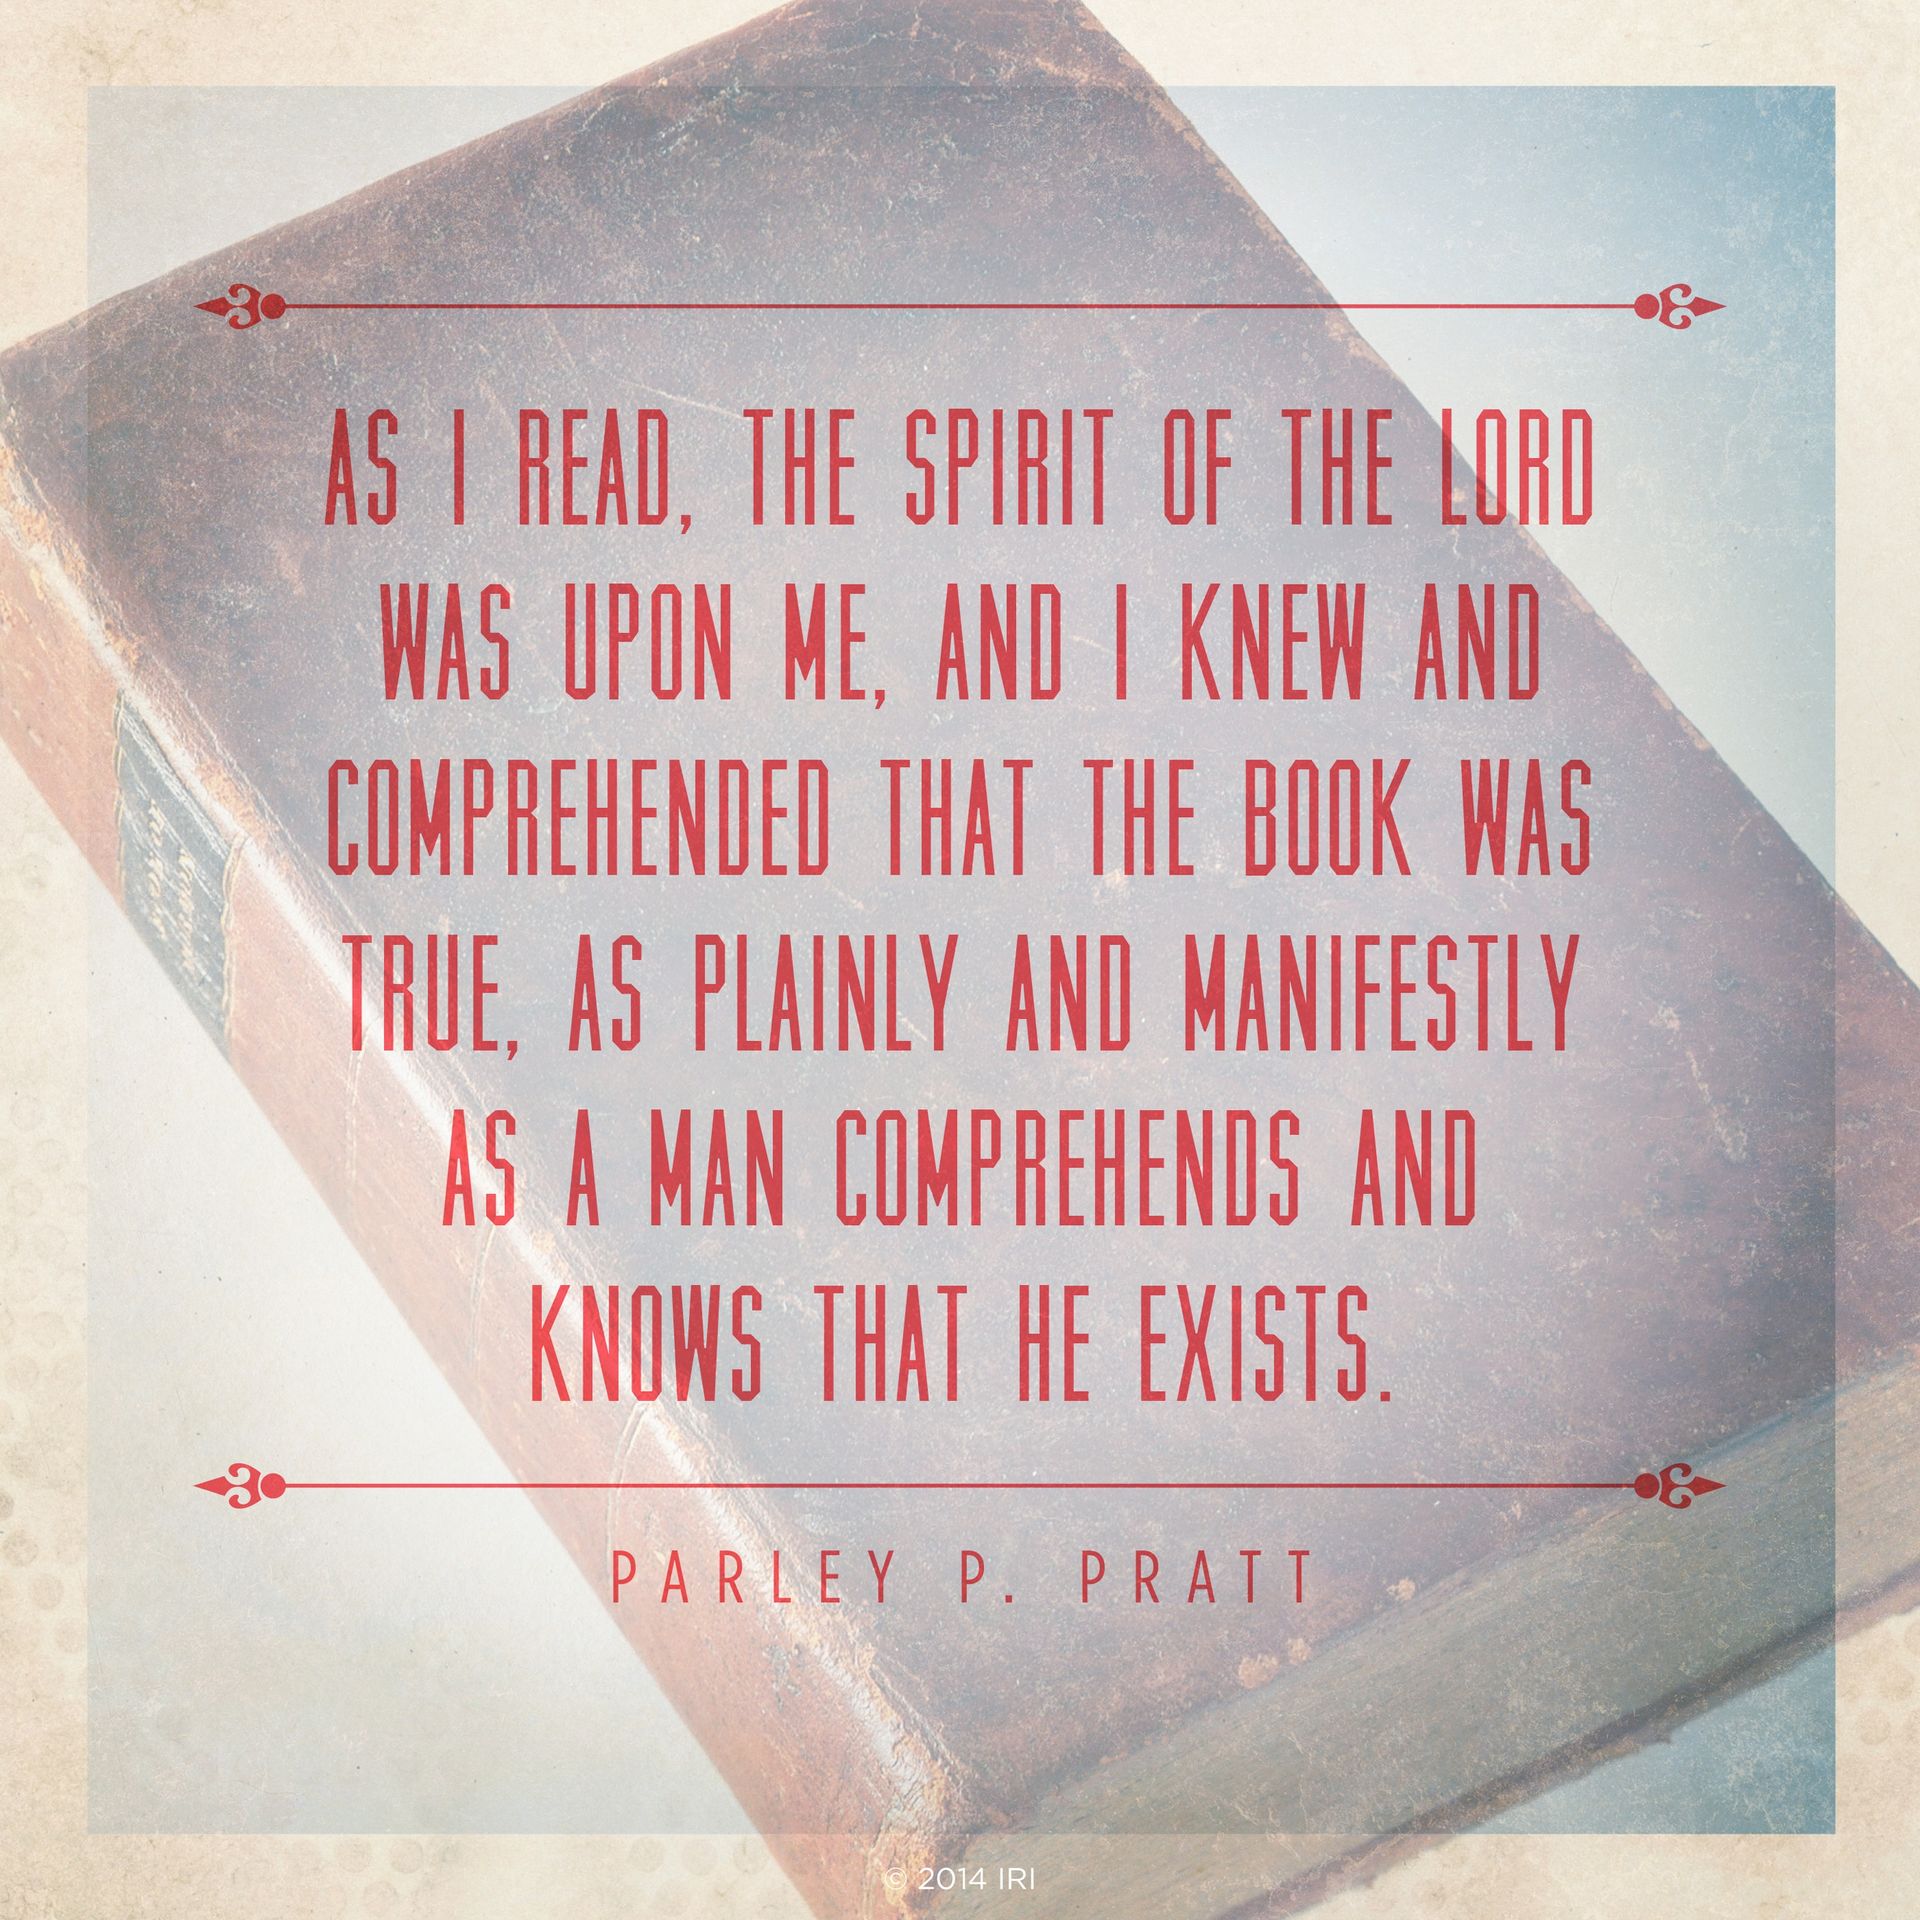 “As I read, the spirit of the Lord was upon me, and I knew and comprehended that the book was true, as plainly and manifestly as a man comprehends and knows that he exists.”—Parley P. Pratt, Autobiography of Parley P. Pratt, ed. Parley P. Pratt Jr. (1938), 36–37